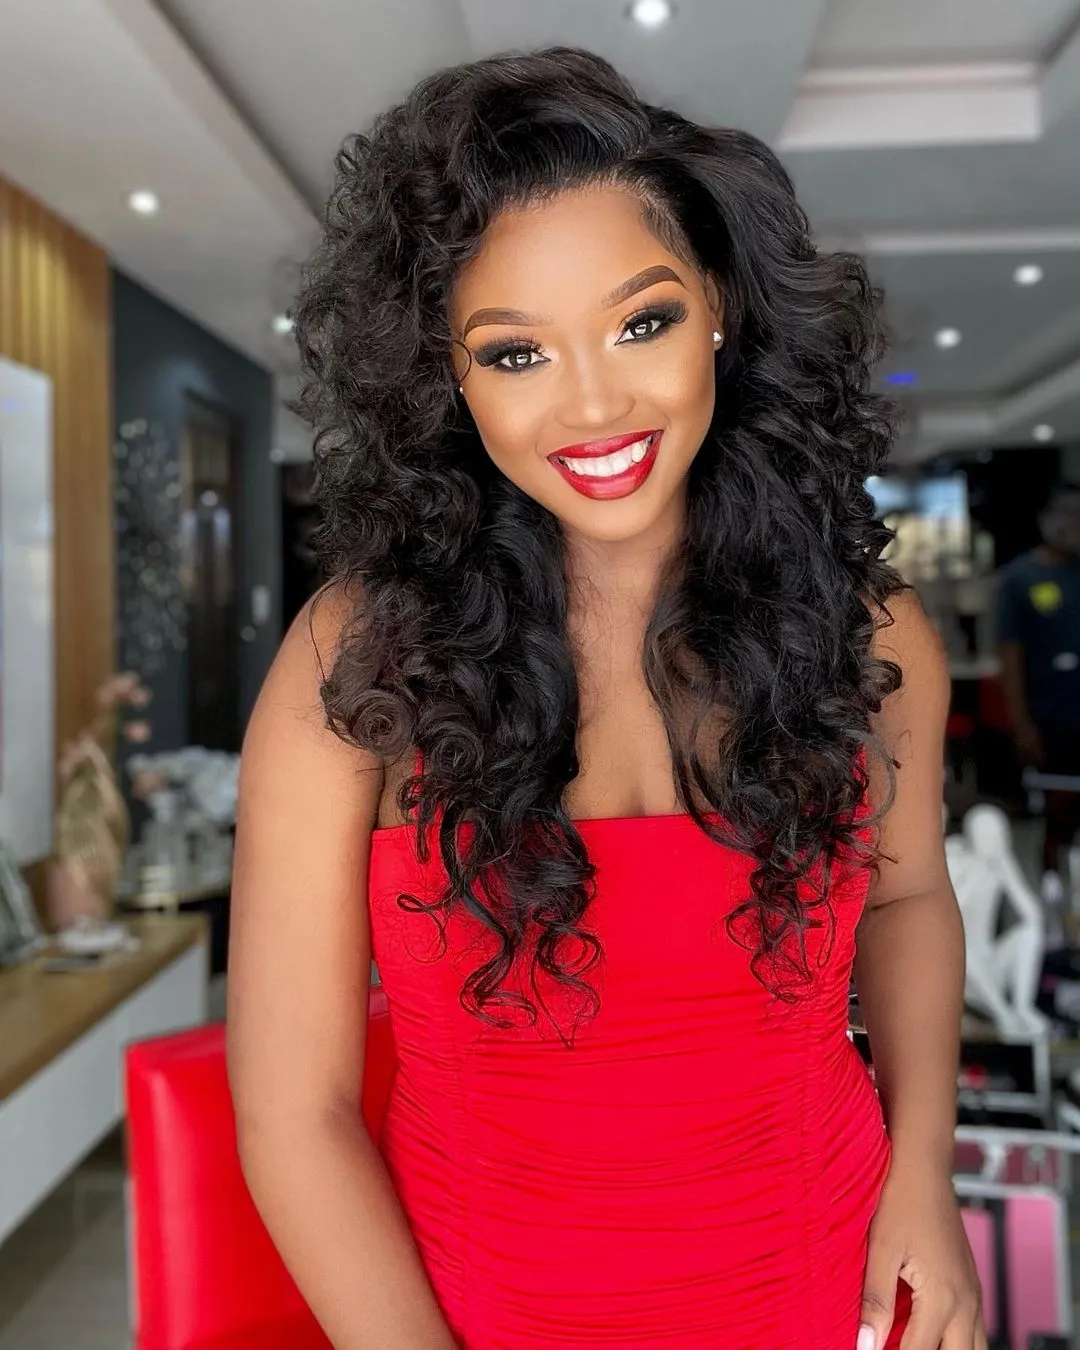 Actress Nelisiwe Sibiya tease fans with a hot photo lying on the bed